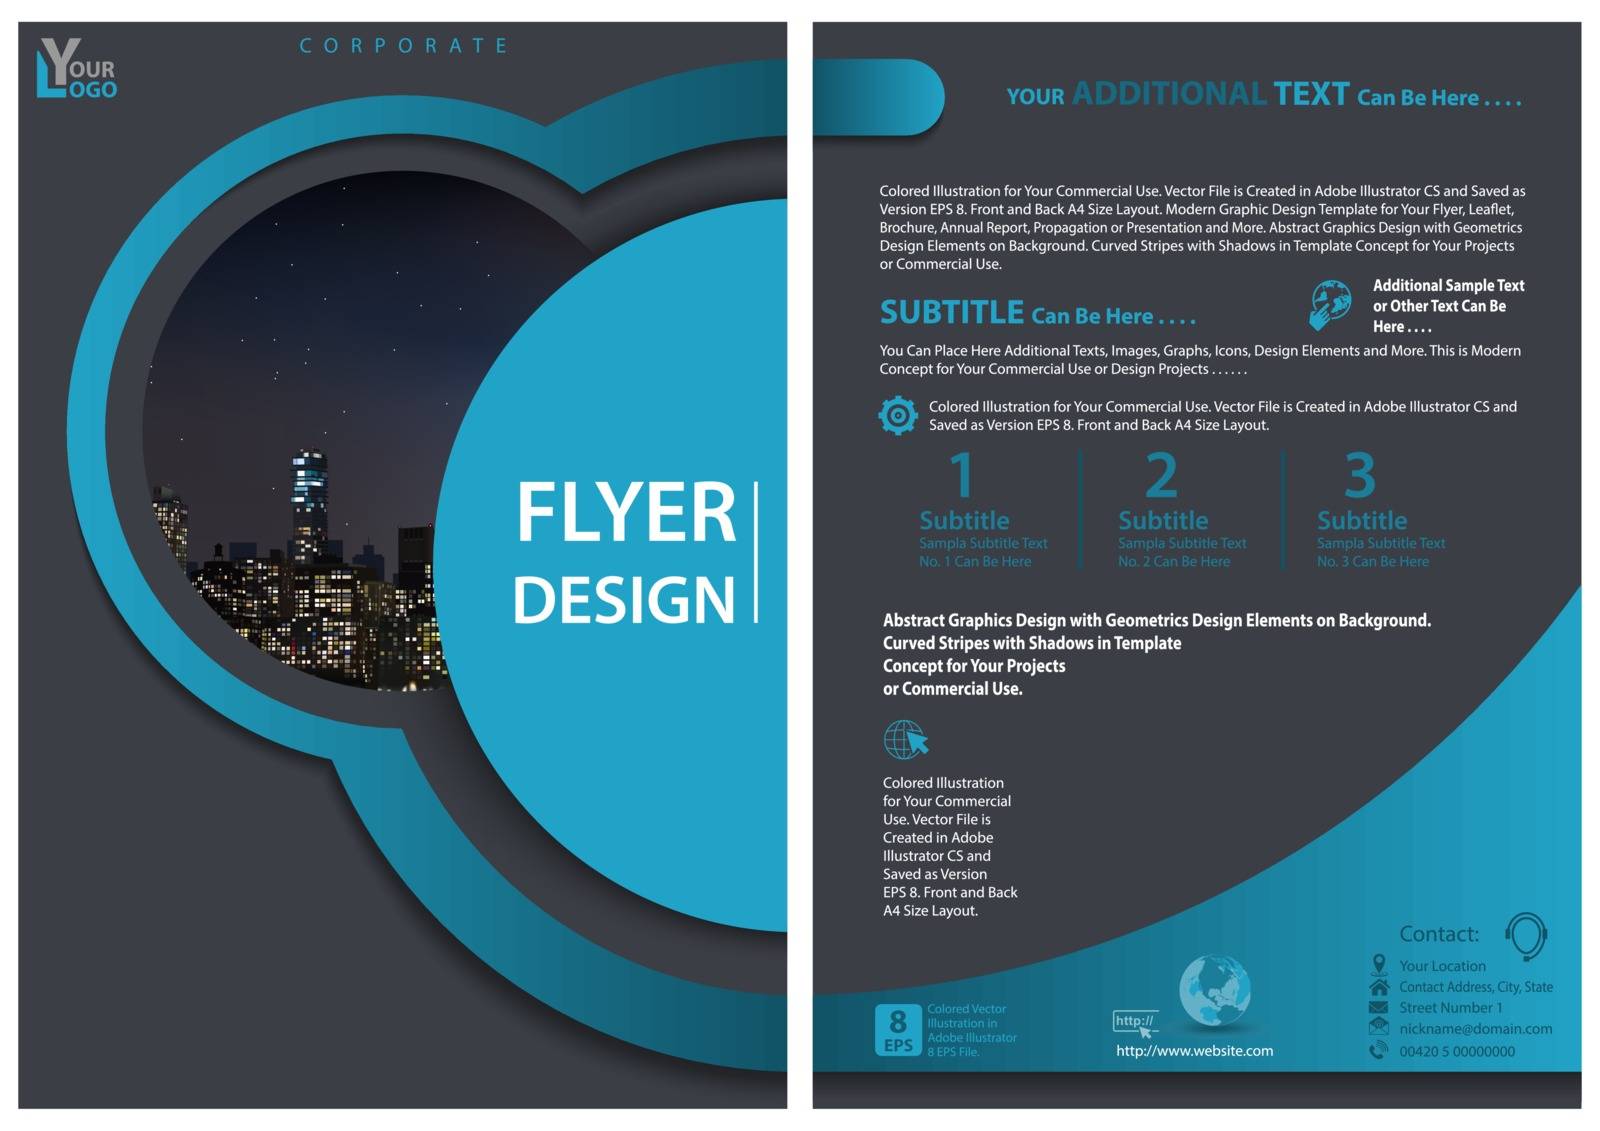 Modern Flyer Template with Geometric Design in Blue Tones - Layered Shapes with Shadows and Imaginary Illustration of Cityscape, Vector